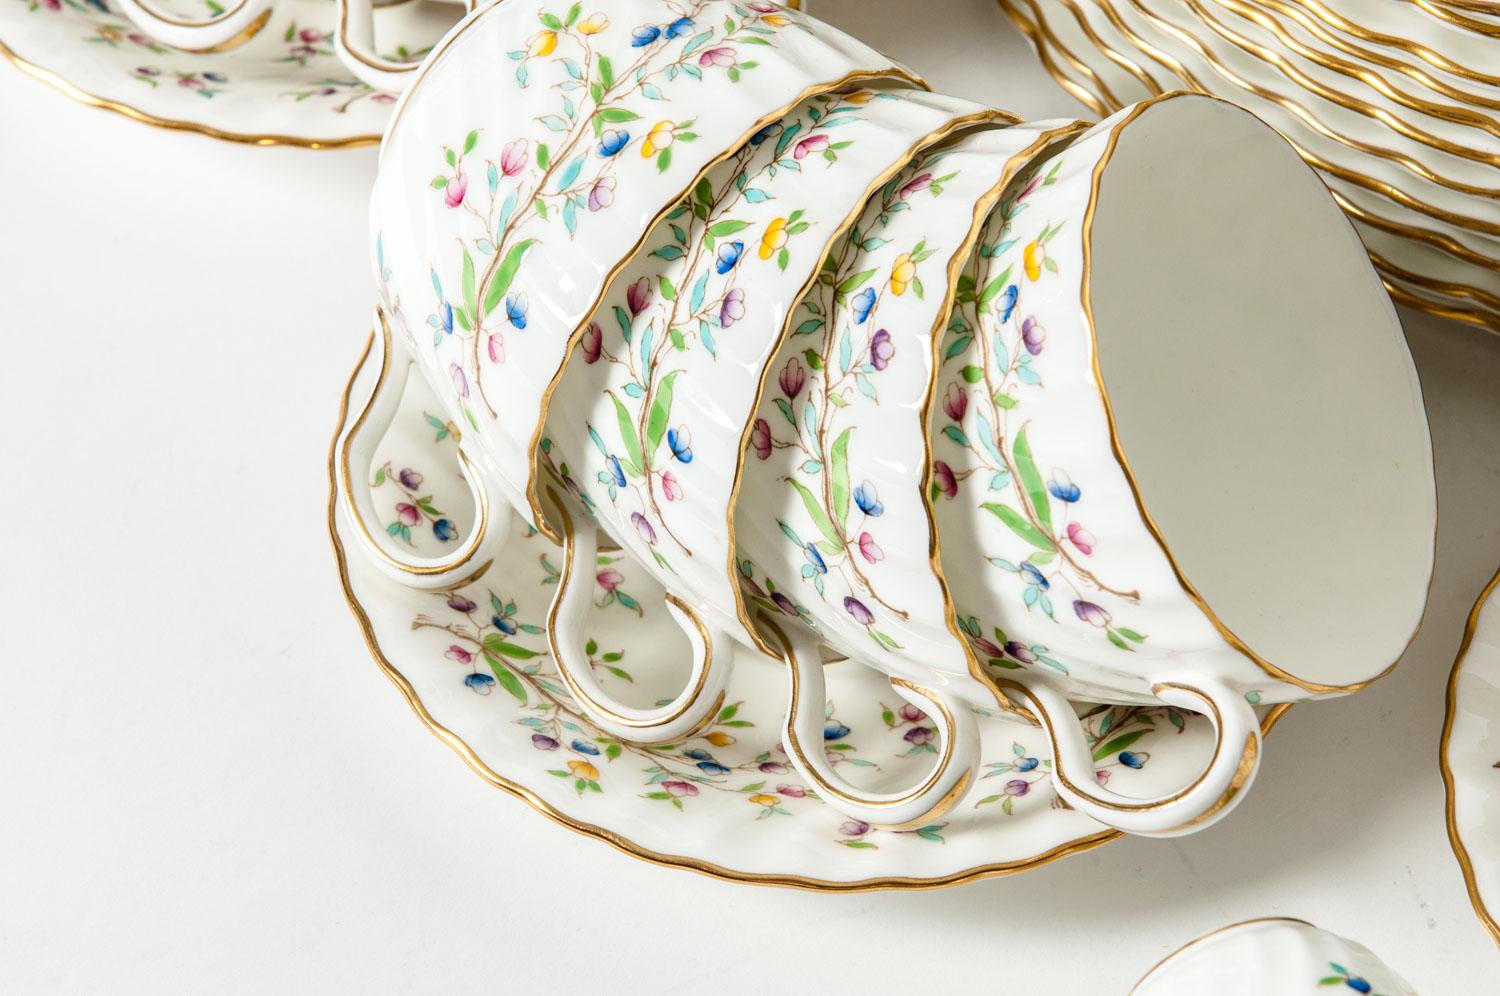 Minton English Full Service Dinnerware for 12 People 6